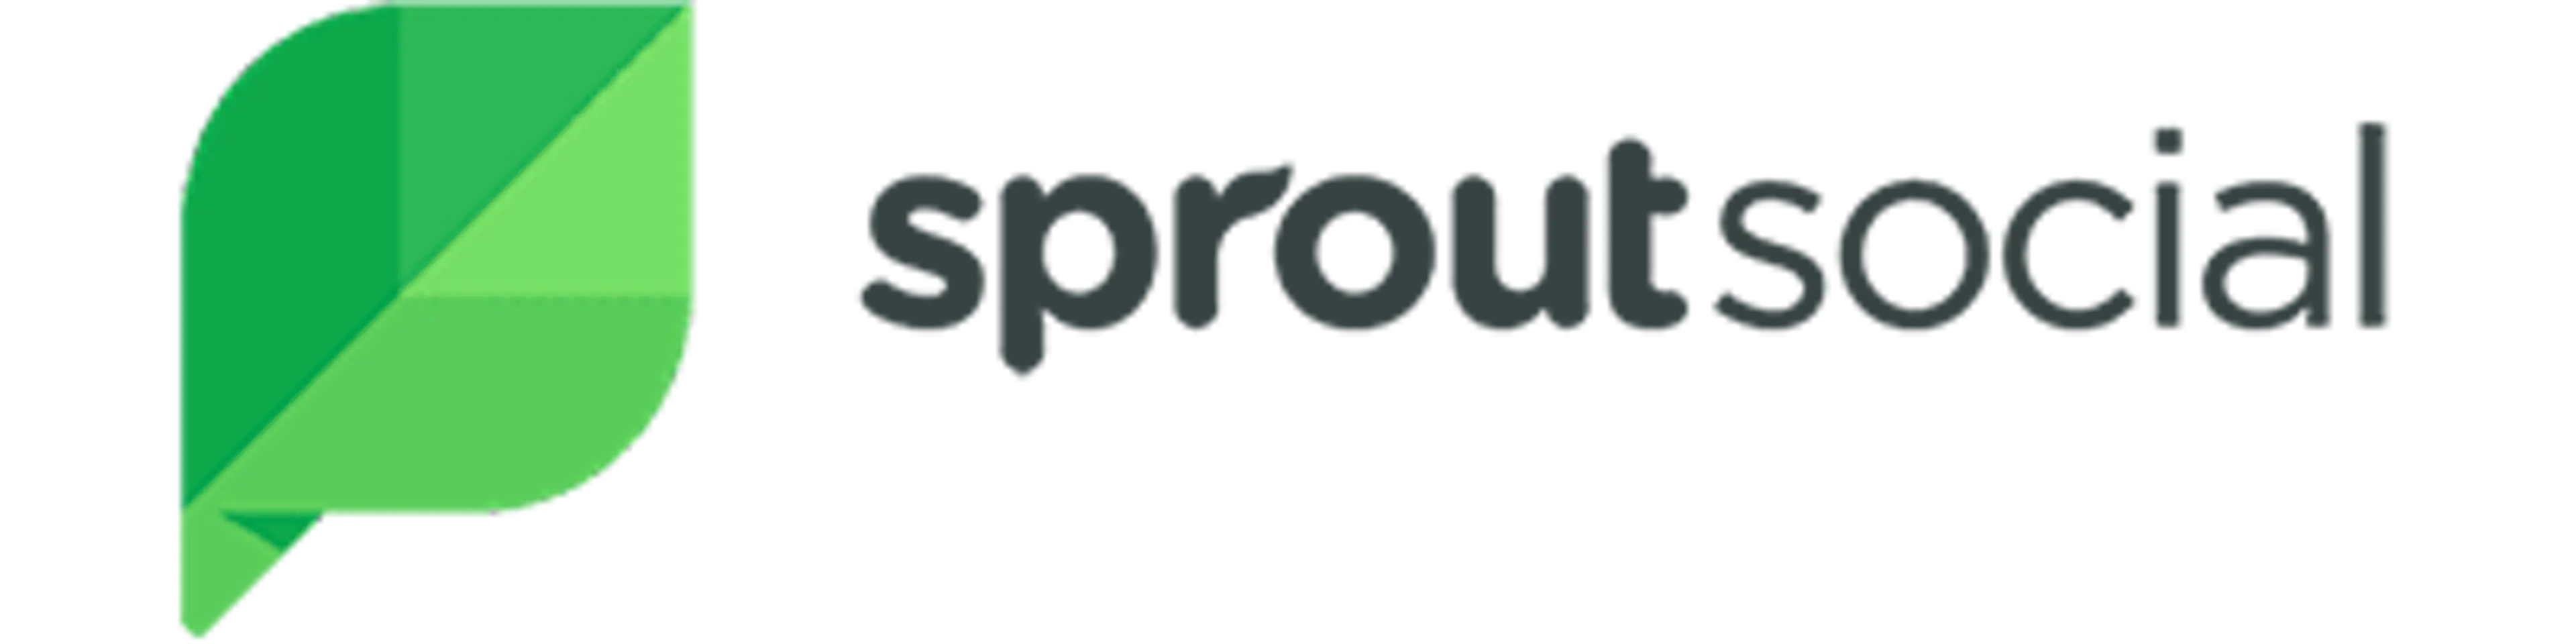 SPROUT SOCIAL